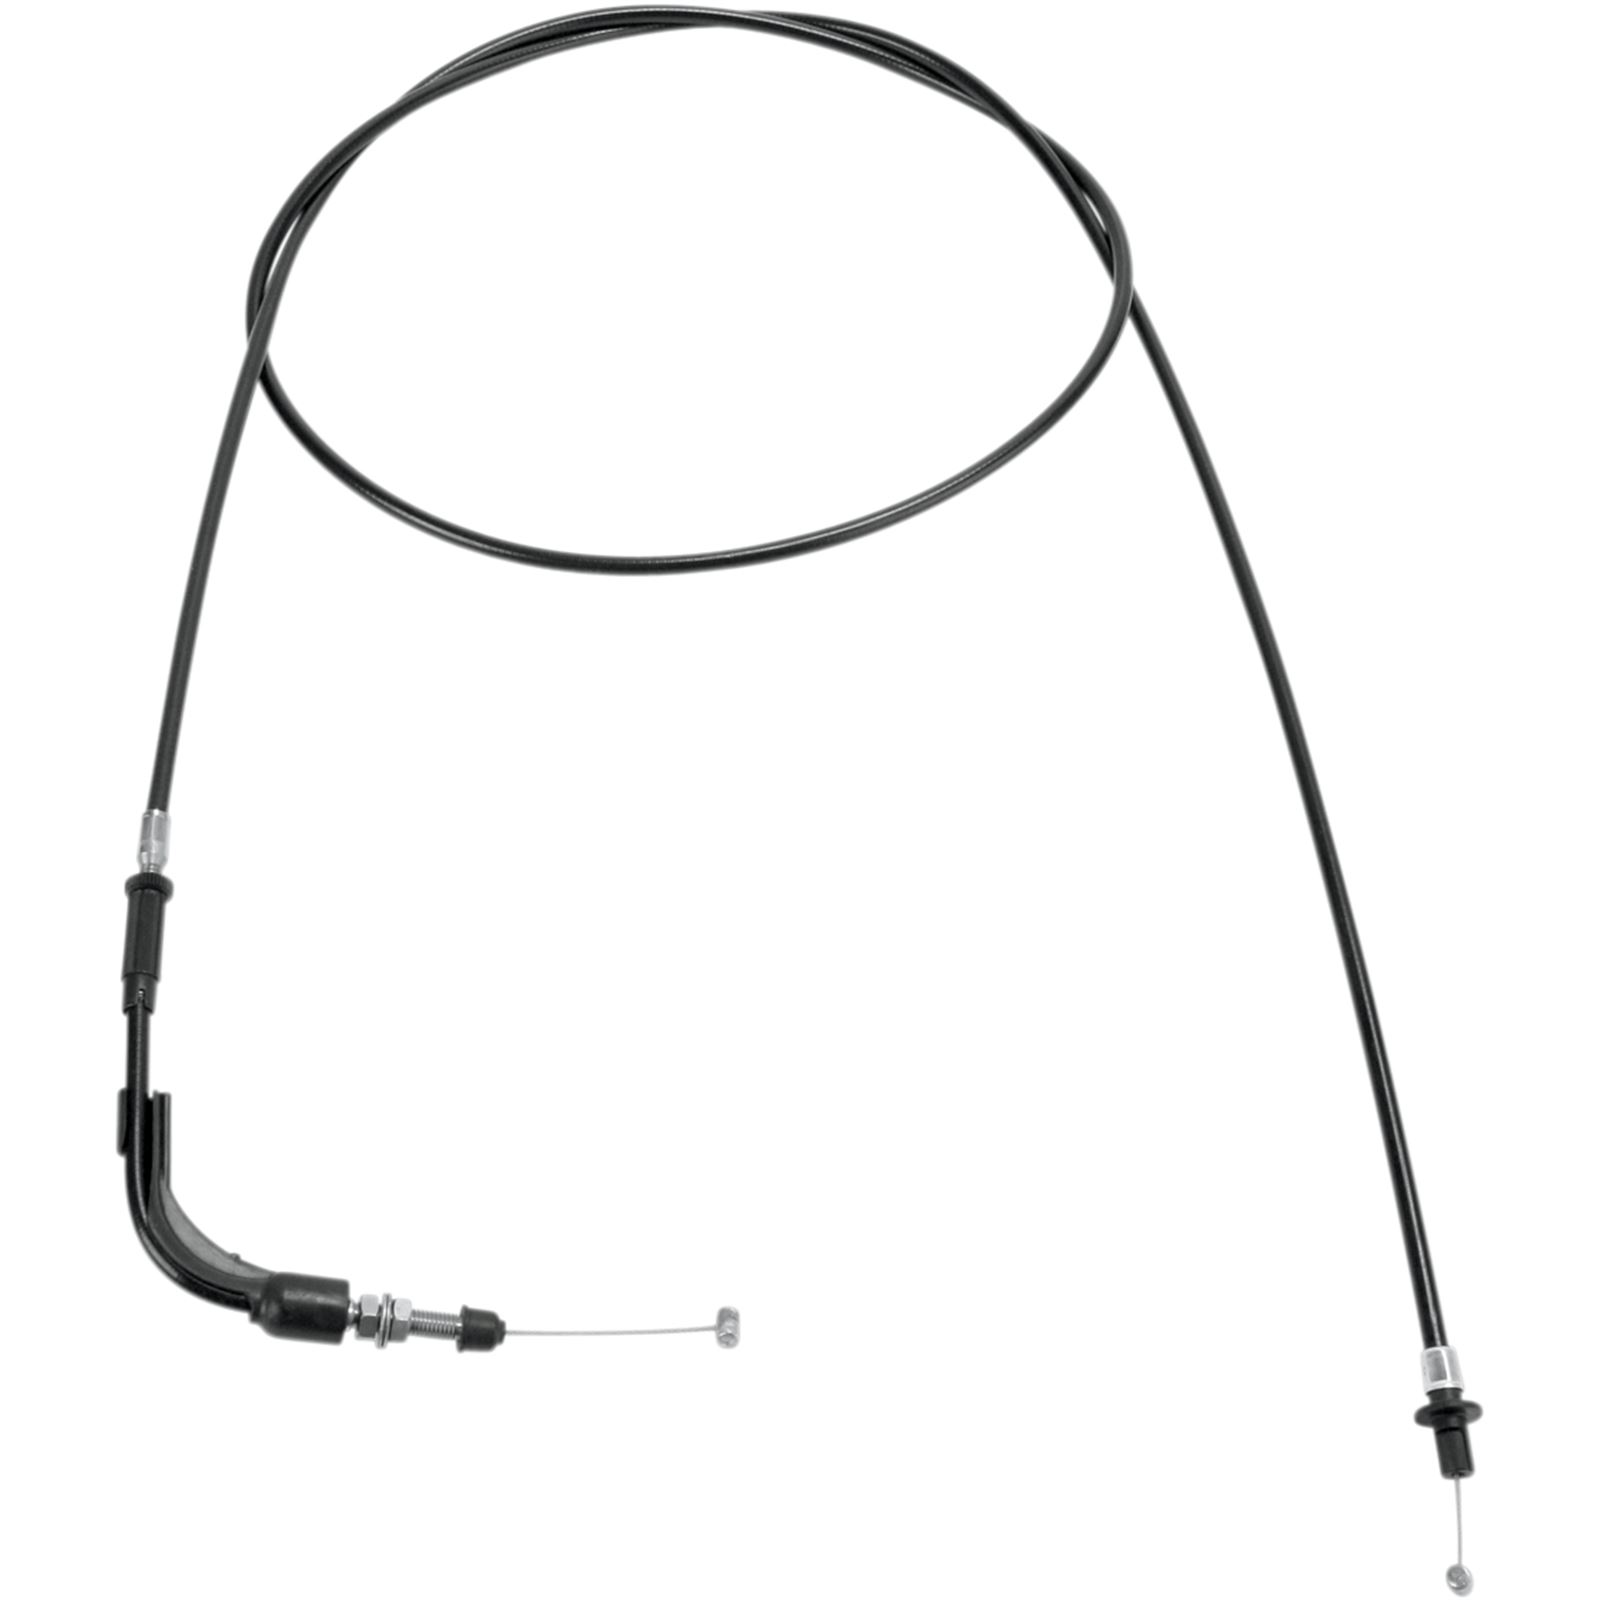 WSM Throttle Cable for Polaris